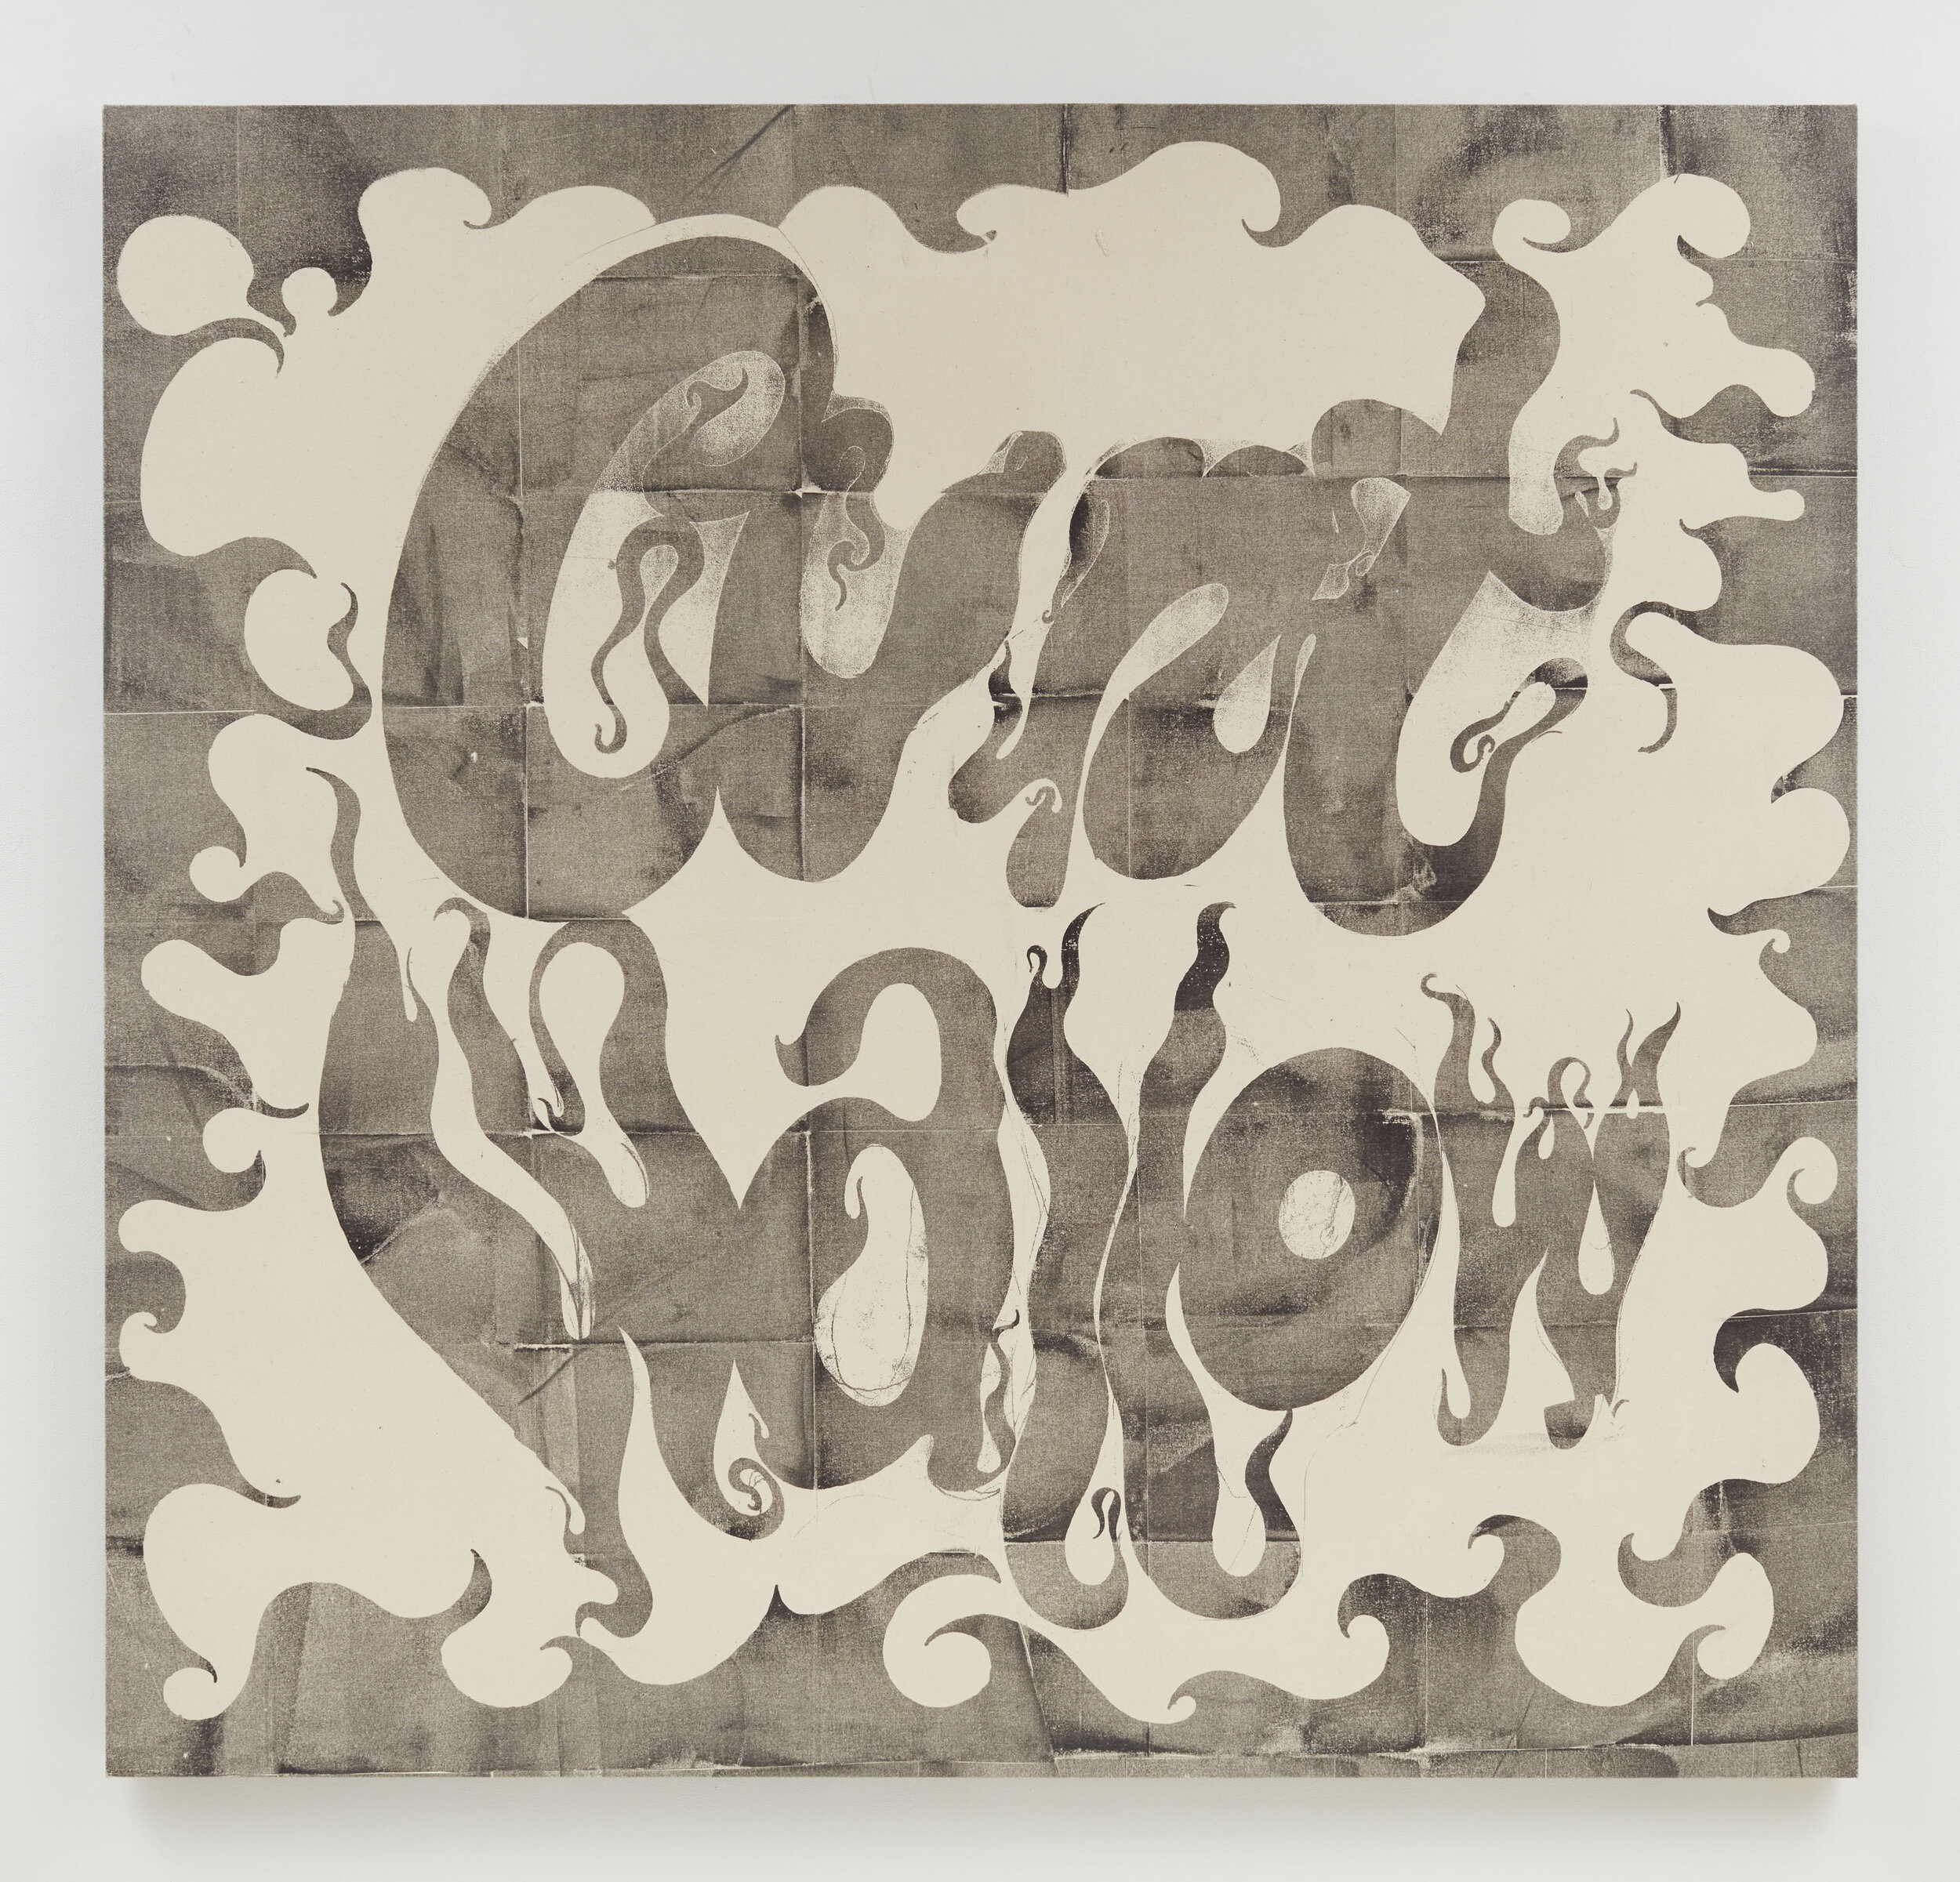 Untitled (Cunt wallow), 1993